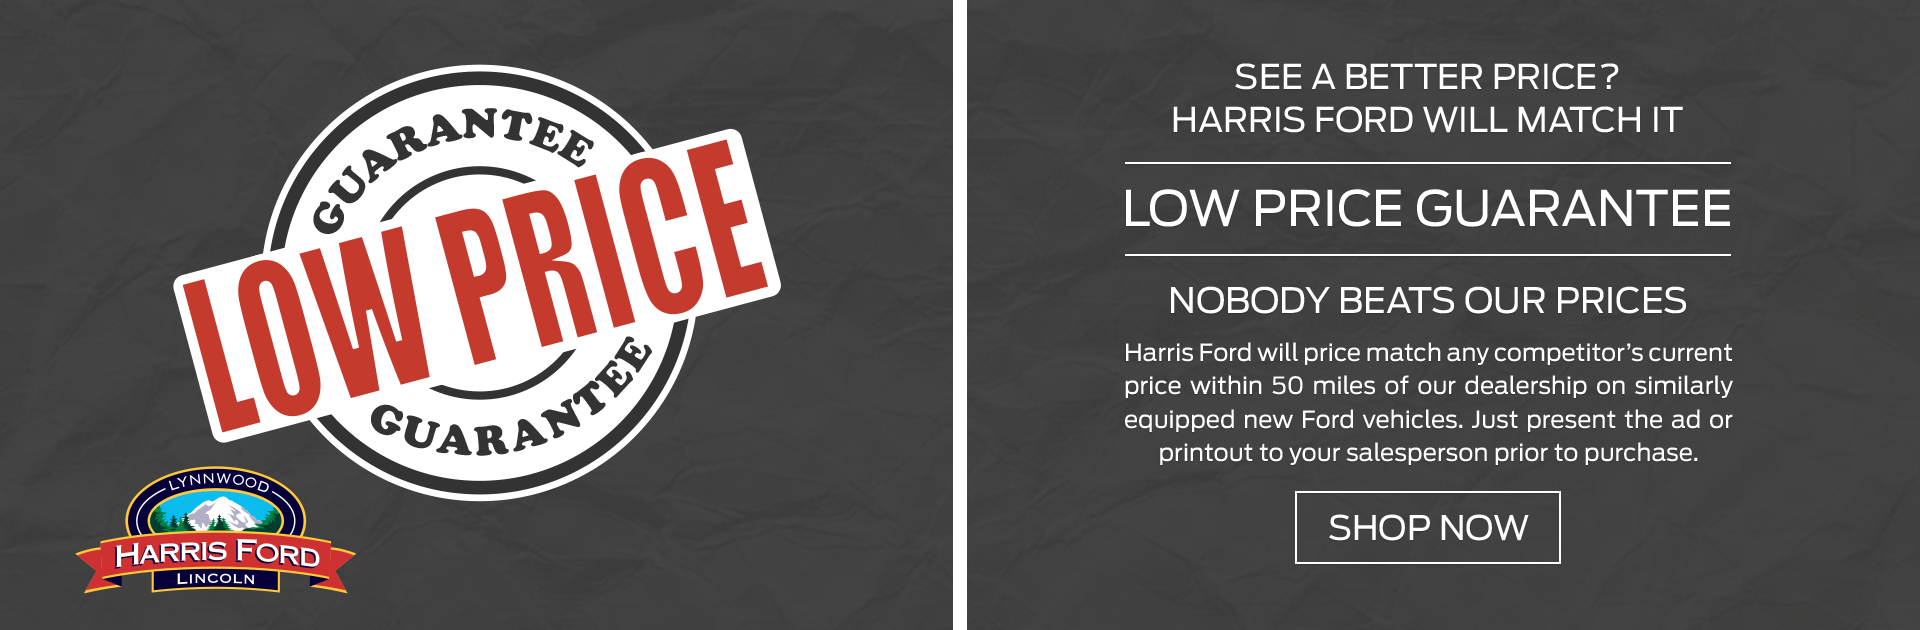 Harris Ford Lowest Price Guarantee